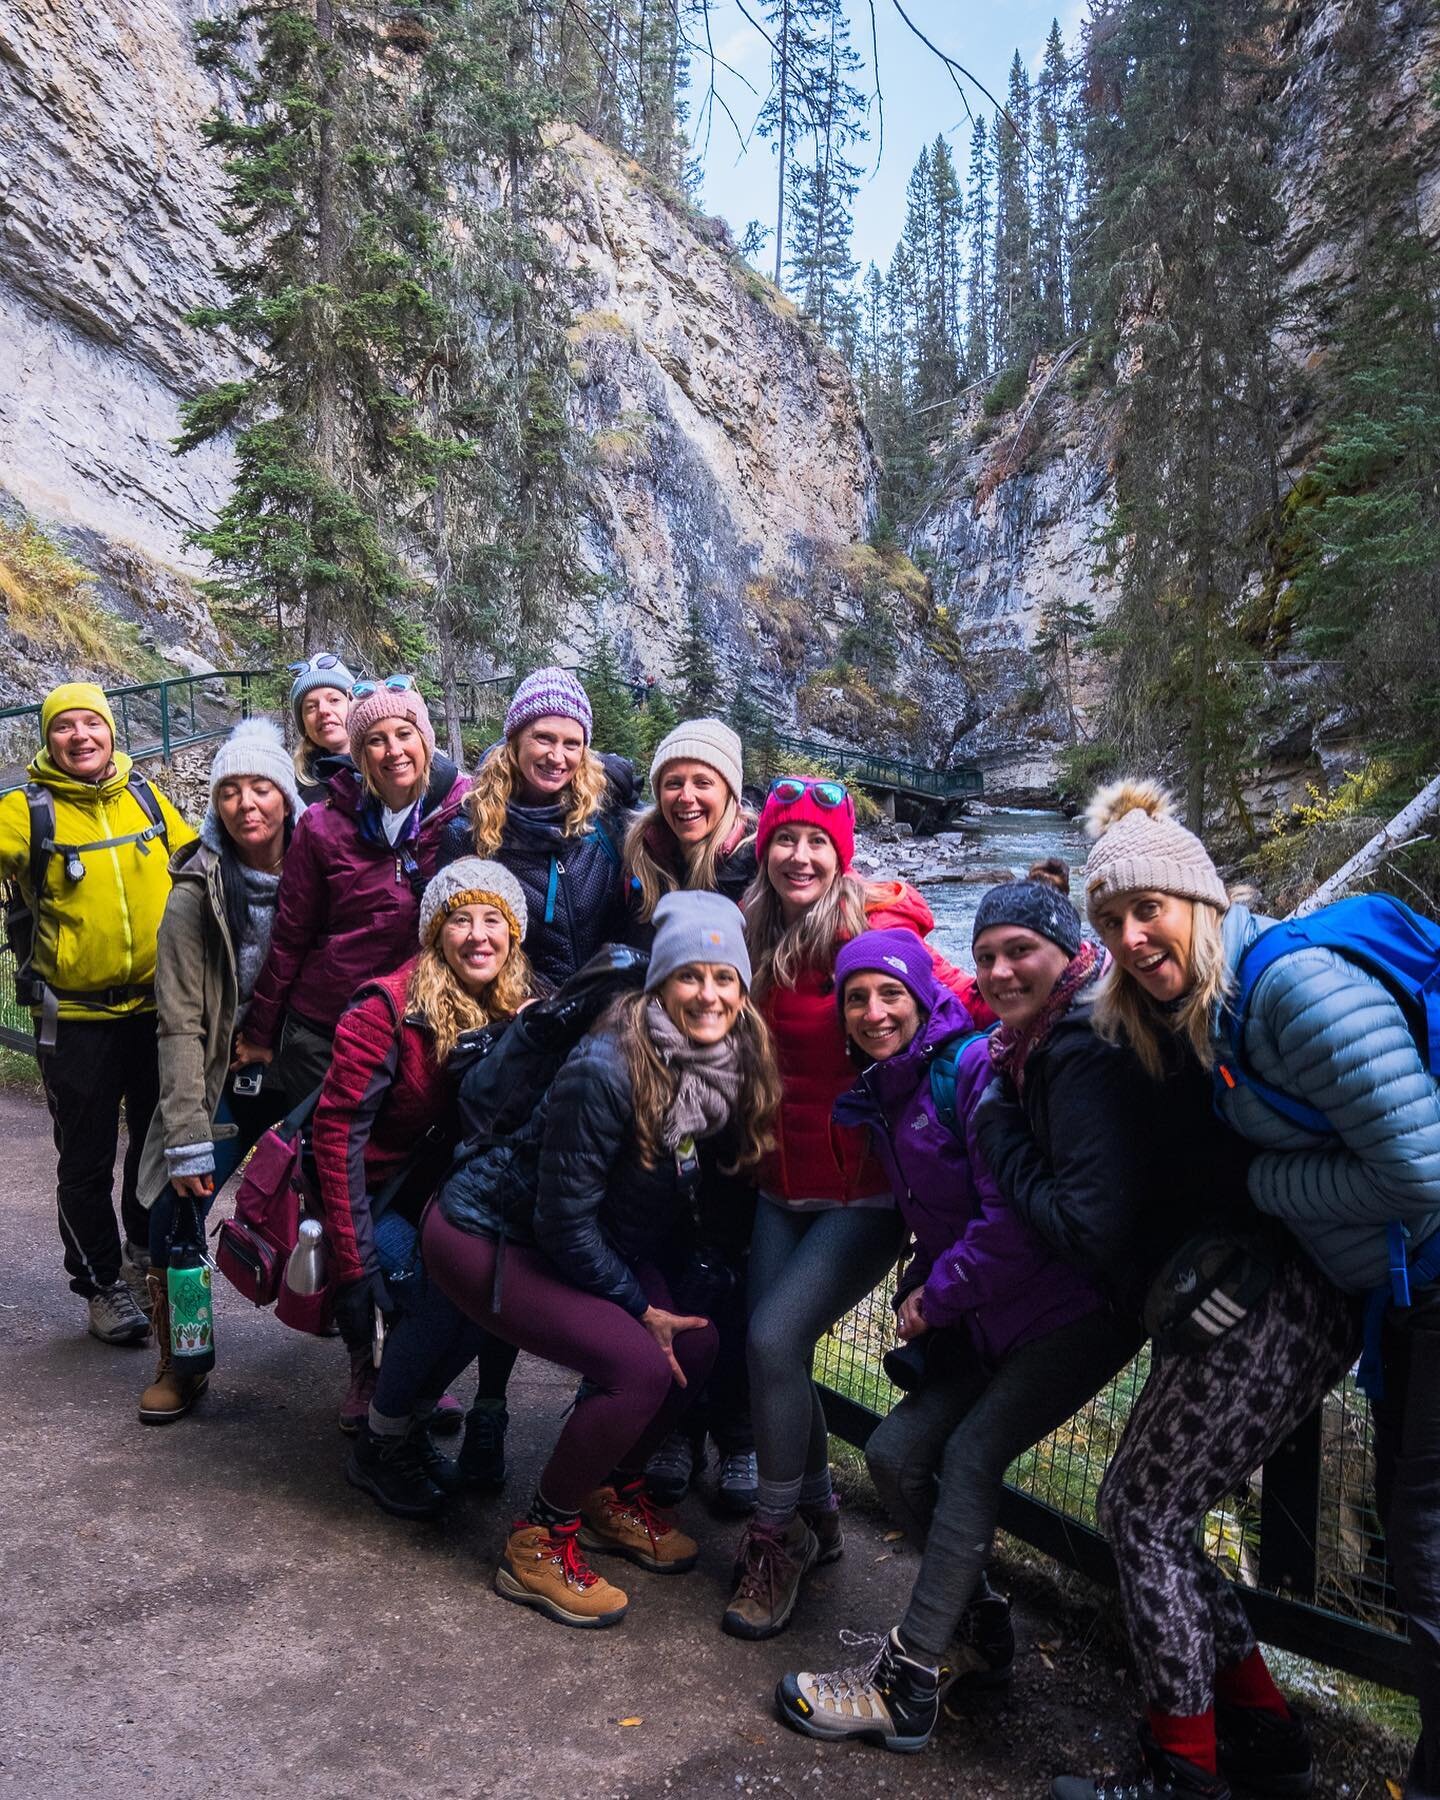 POV: You just completed a rewarding waterfall hike led by a very knowledgable guide and are letting the joy pour out with your new friends!

The truth is&hellip;going on a journey to somewhere new or foreign can be intimidating.

That is why you meet